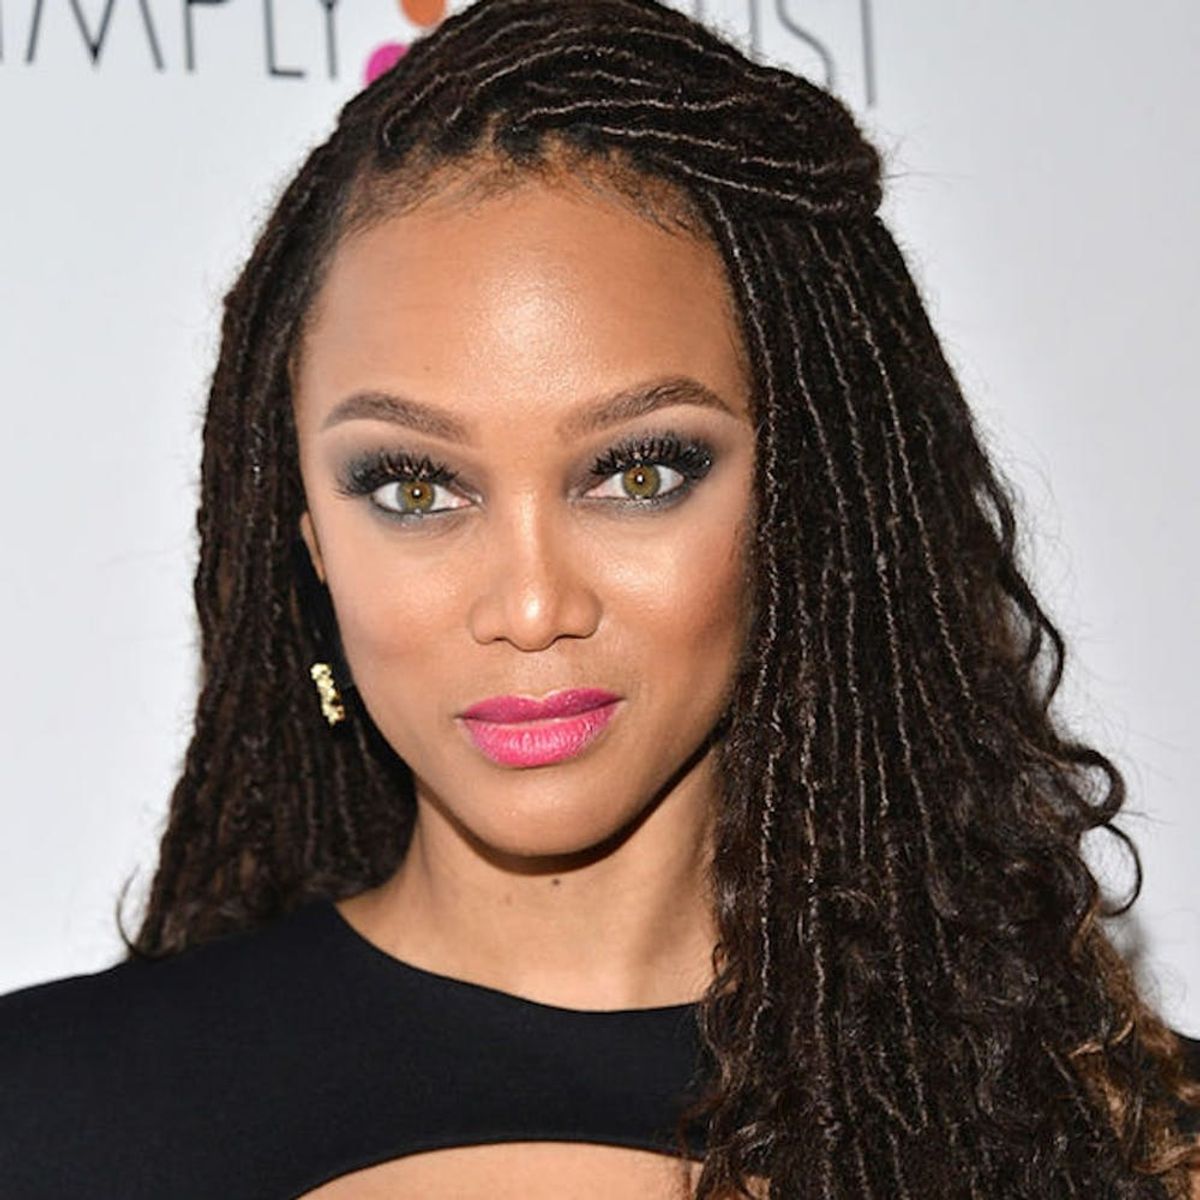 Get the Look of Tyra Banks’ Glam Closet